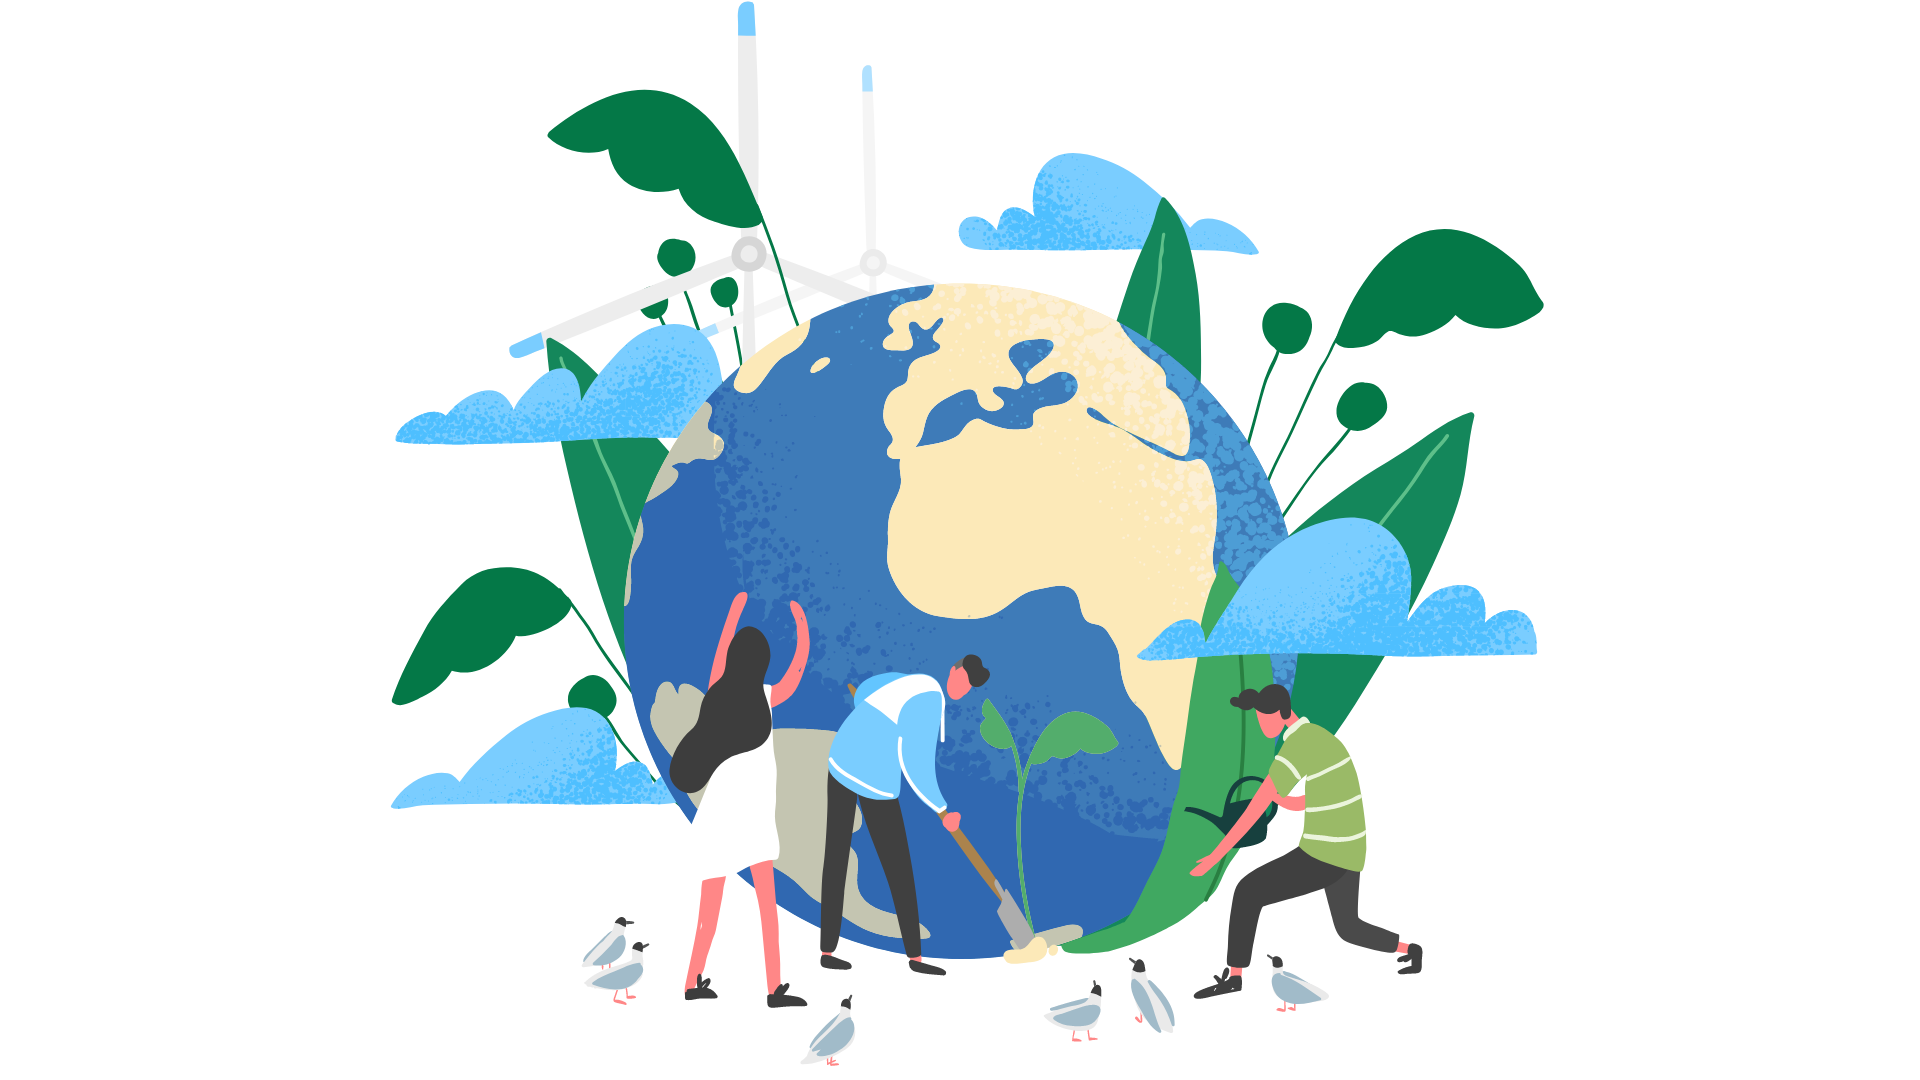 The graphic shows the planet Earth around which plants sprout. Three people take care of the plants and the planet. Windmills stand in the background, and a few birds sit at the feet of the people.